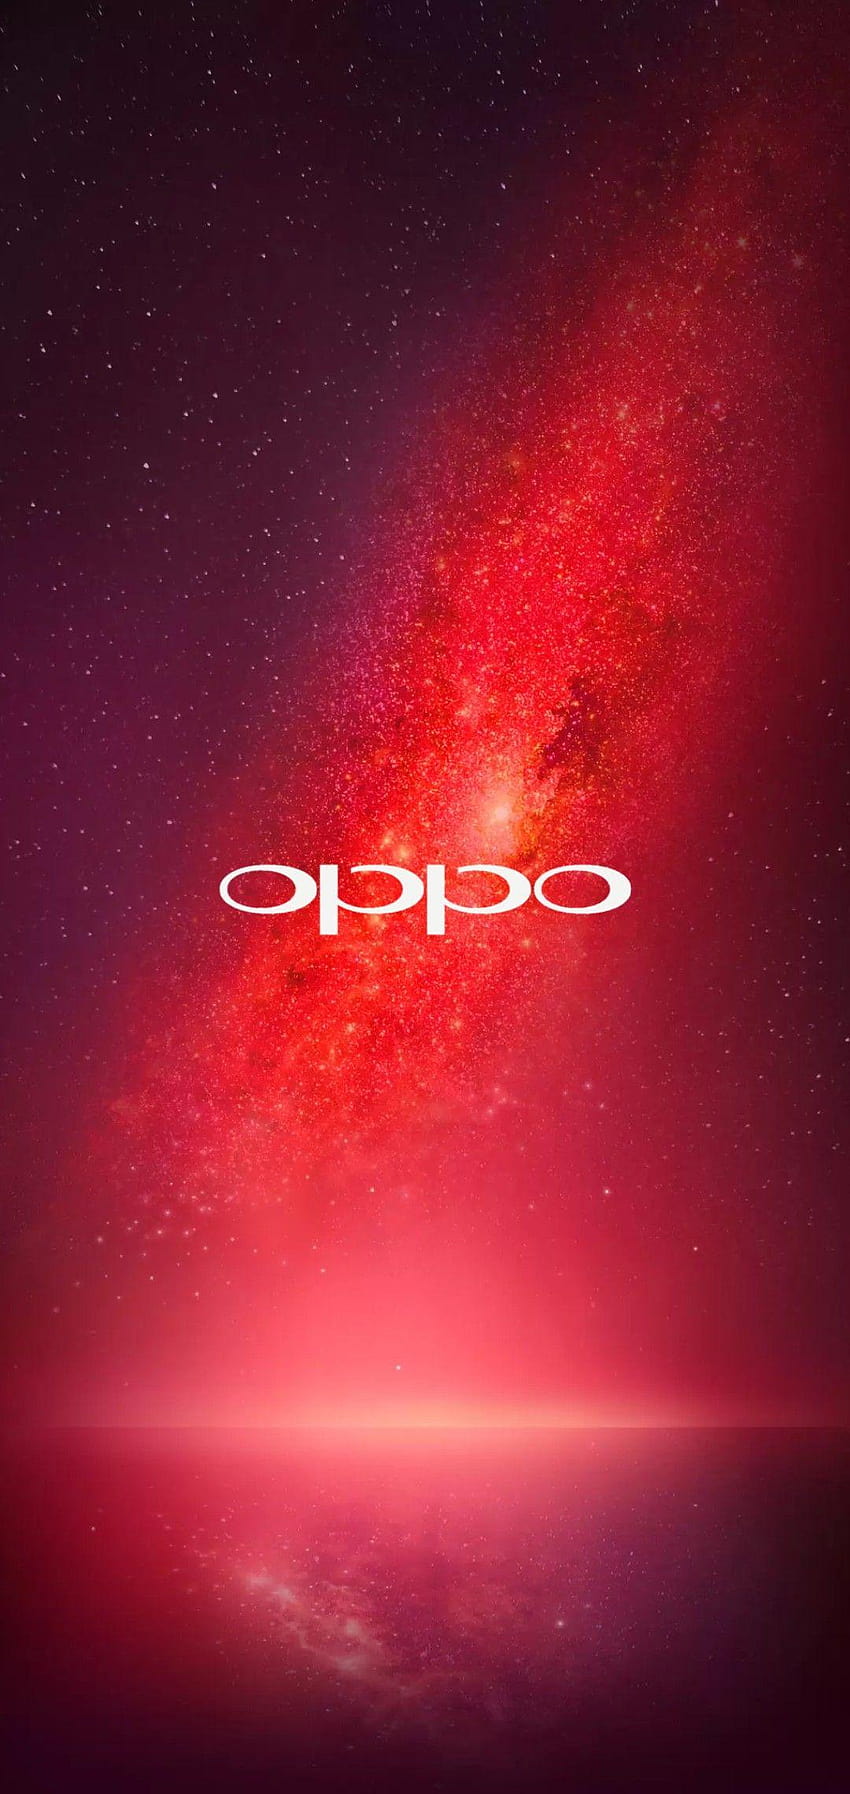 Original oppo space backgrounds in 2019, oppo a9 HD phone wallpaper | Pxfuel